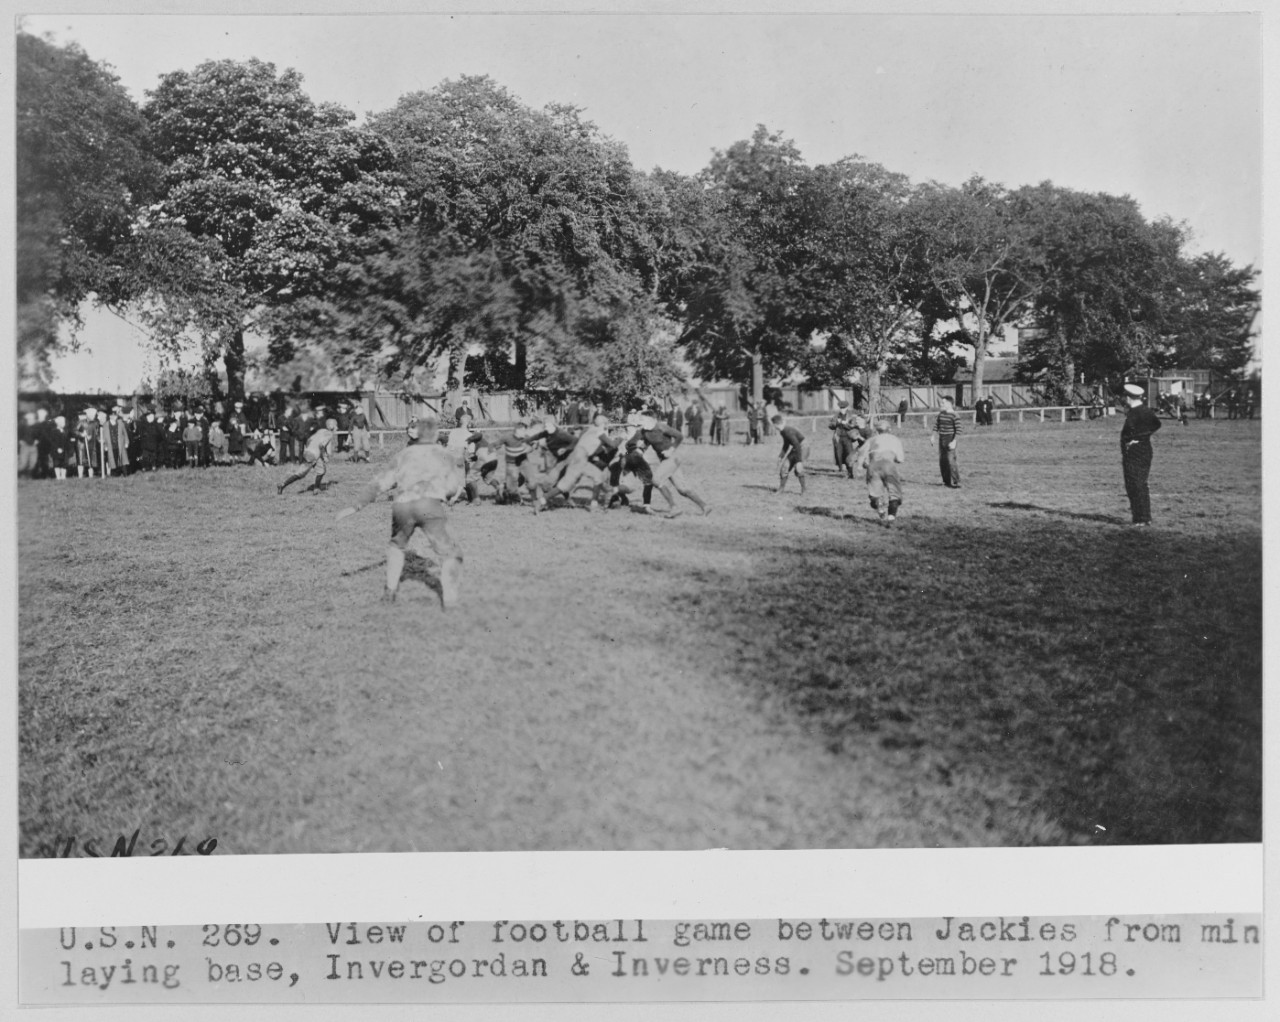 U.S.N. 269 View of football game between Jackies and from mine laying base, Invergordan and Inverness.